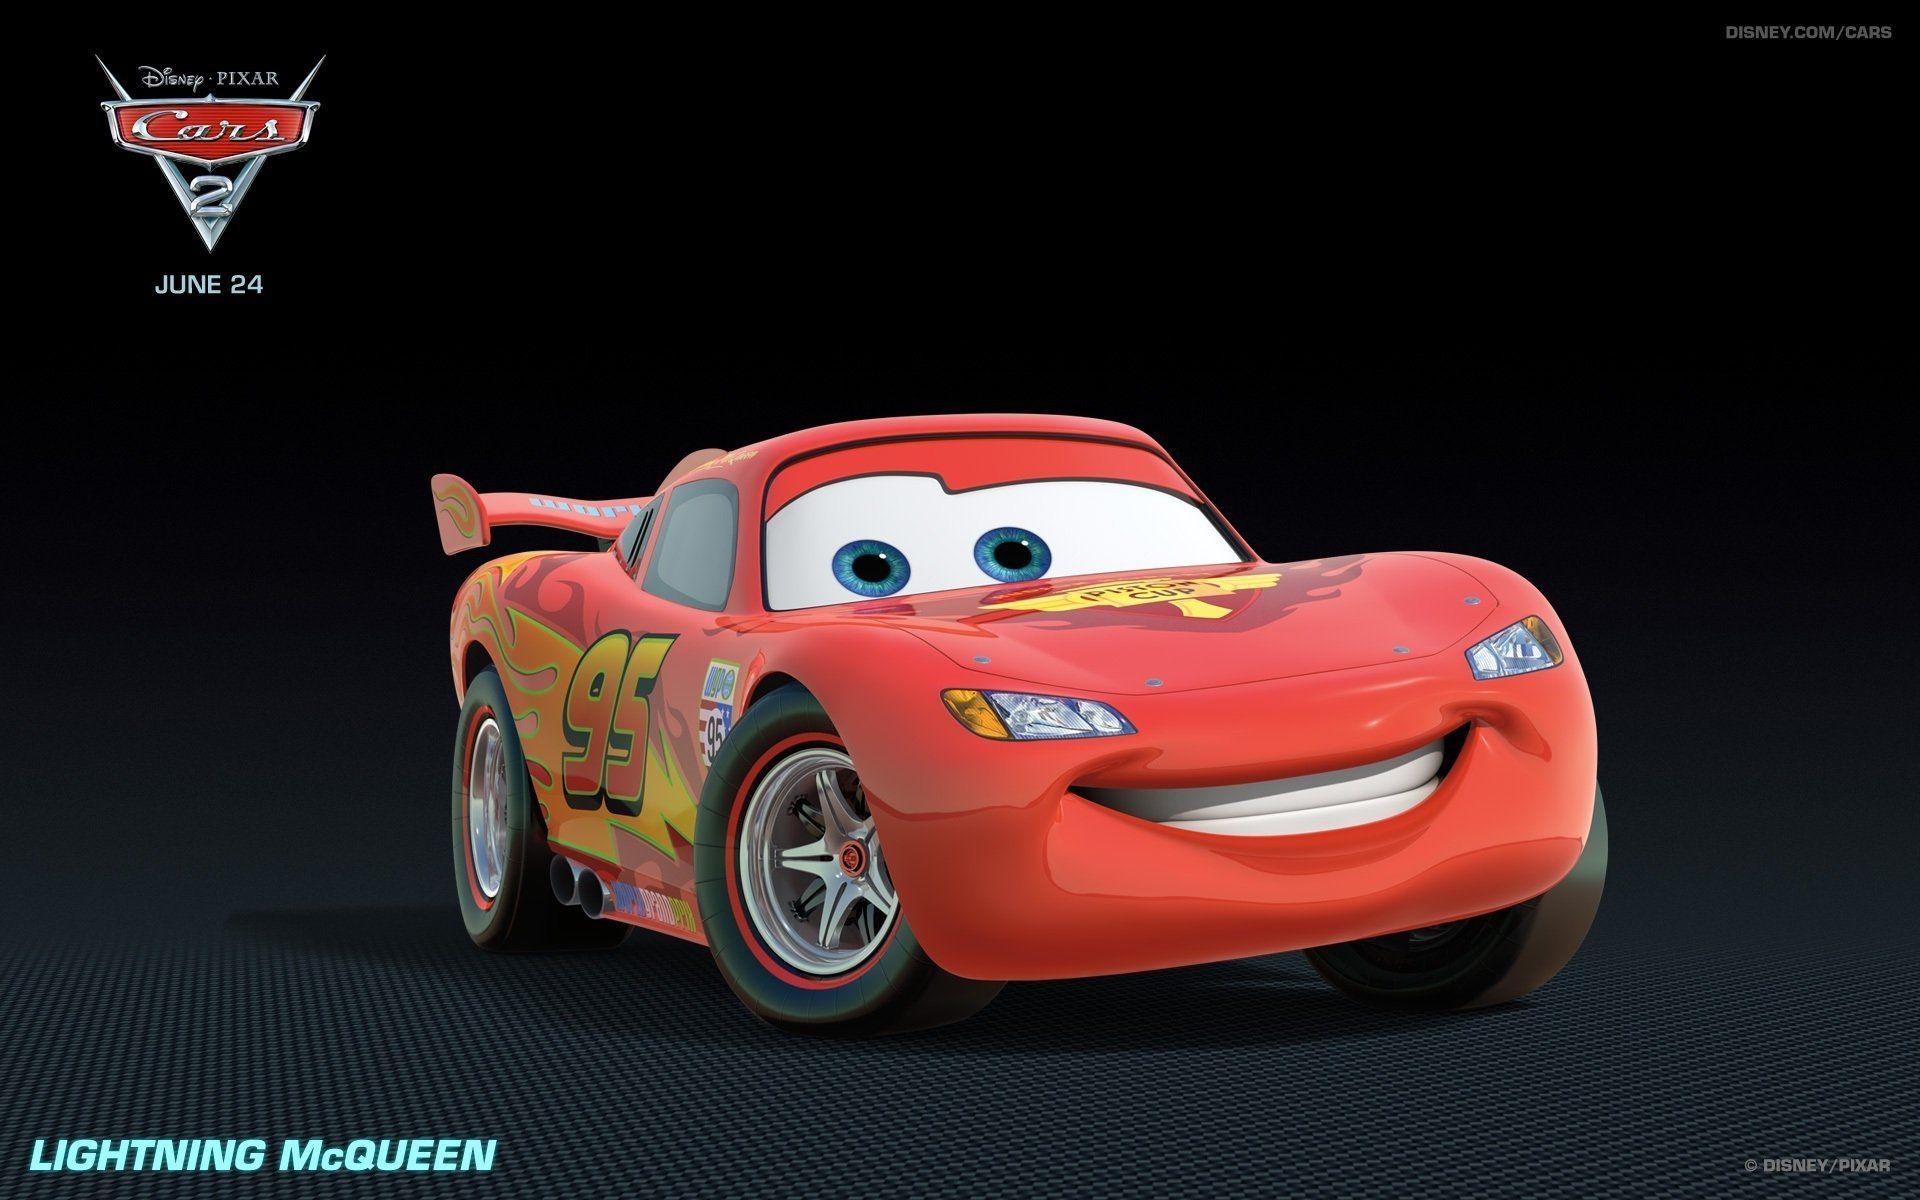 Cars 2 HD Wallpaper and Background Image